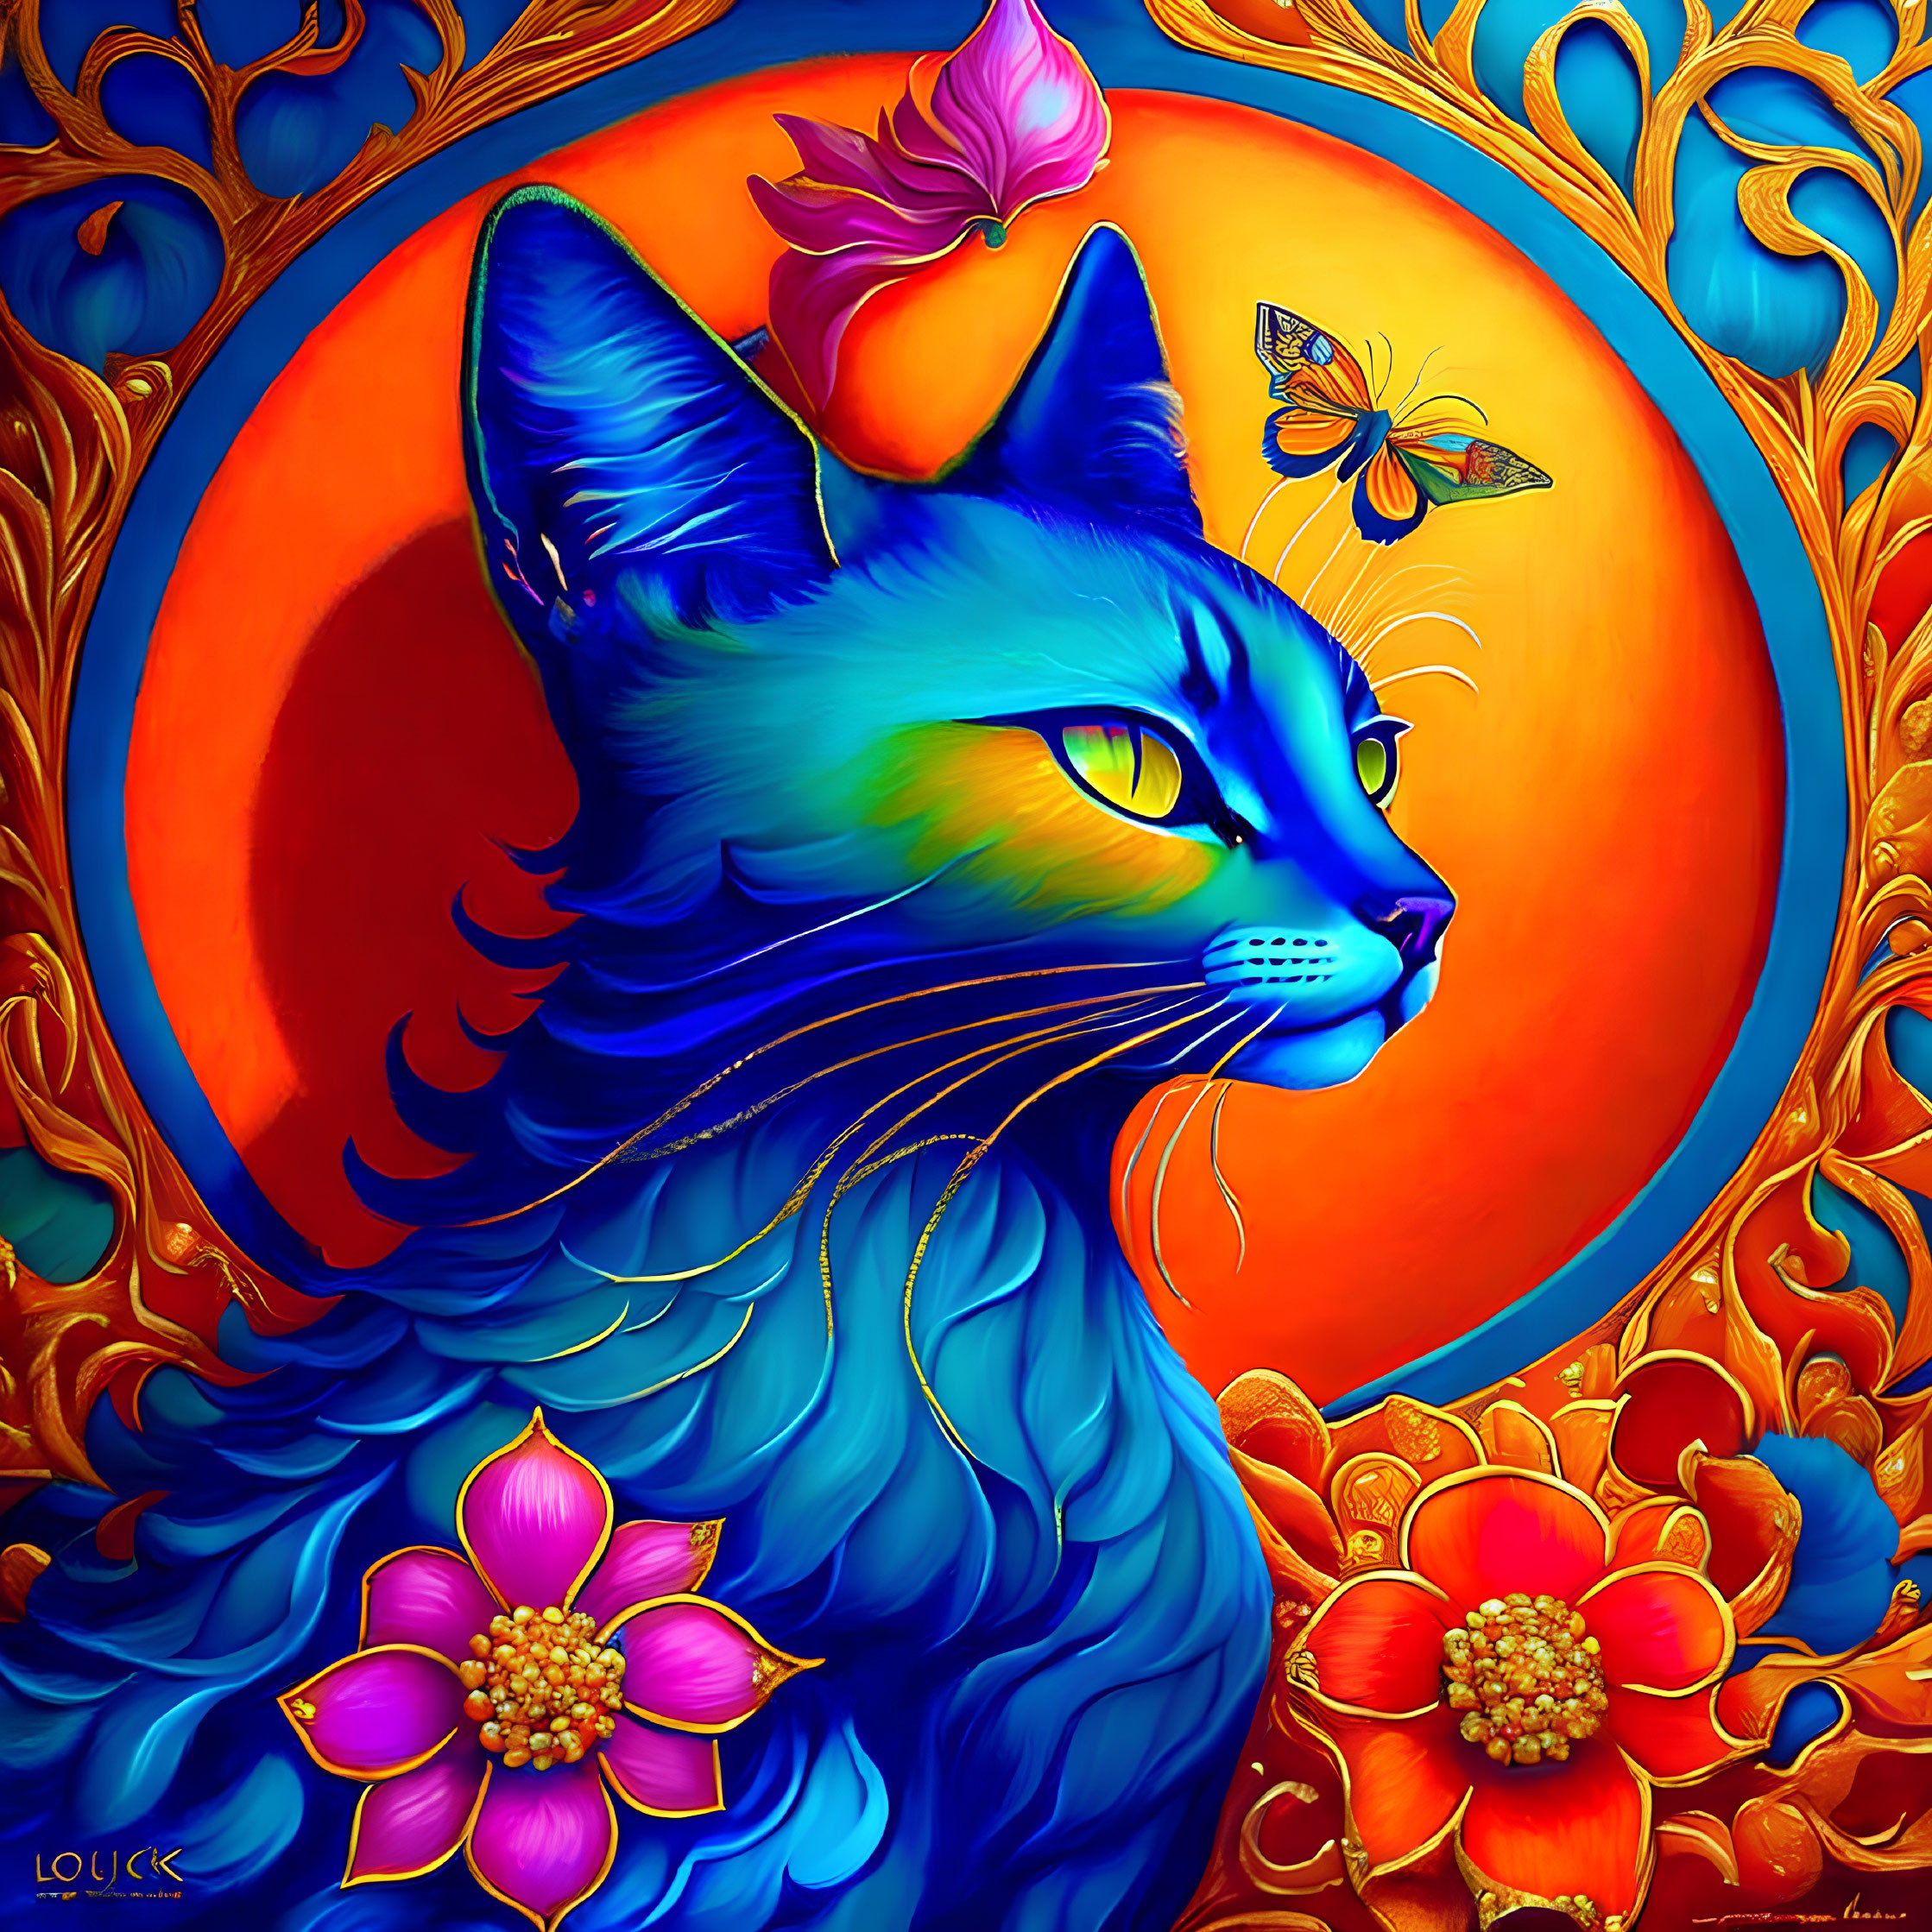 Colorful digital artwork: Blue cat with floral patterns, butterfly, and lotus flowers